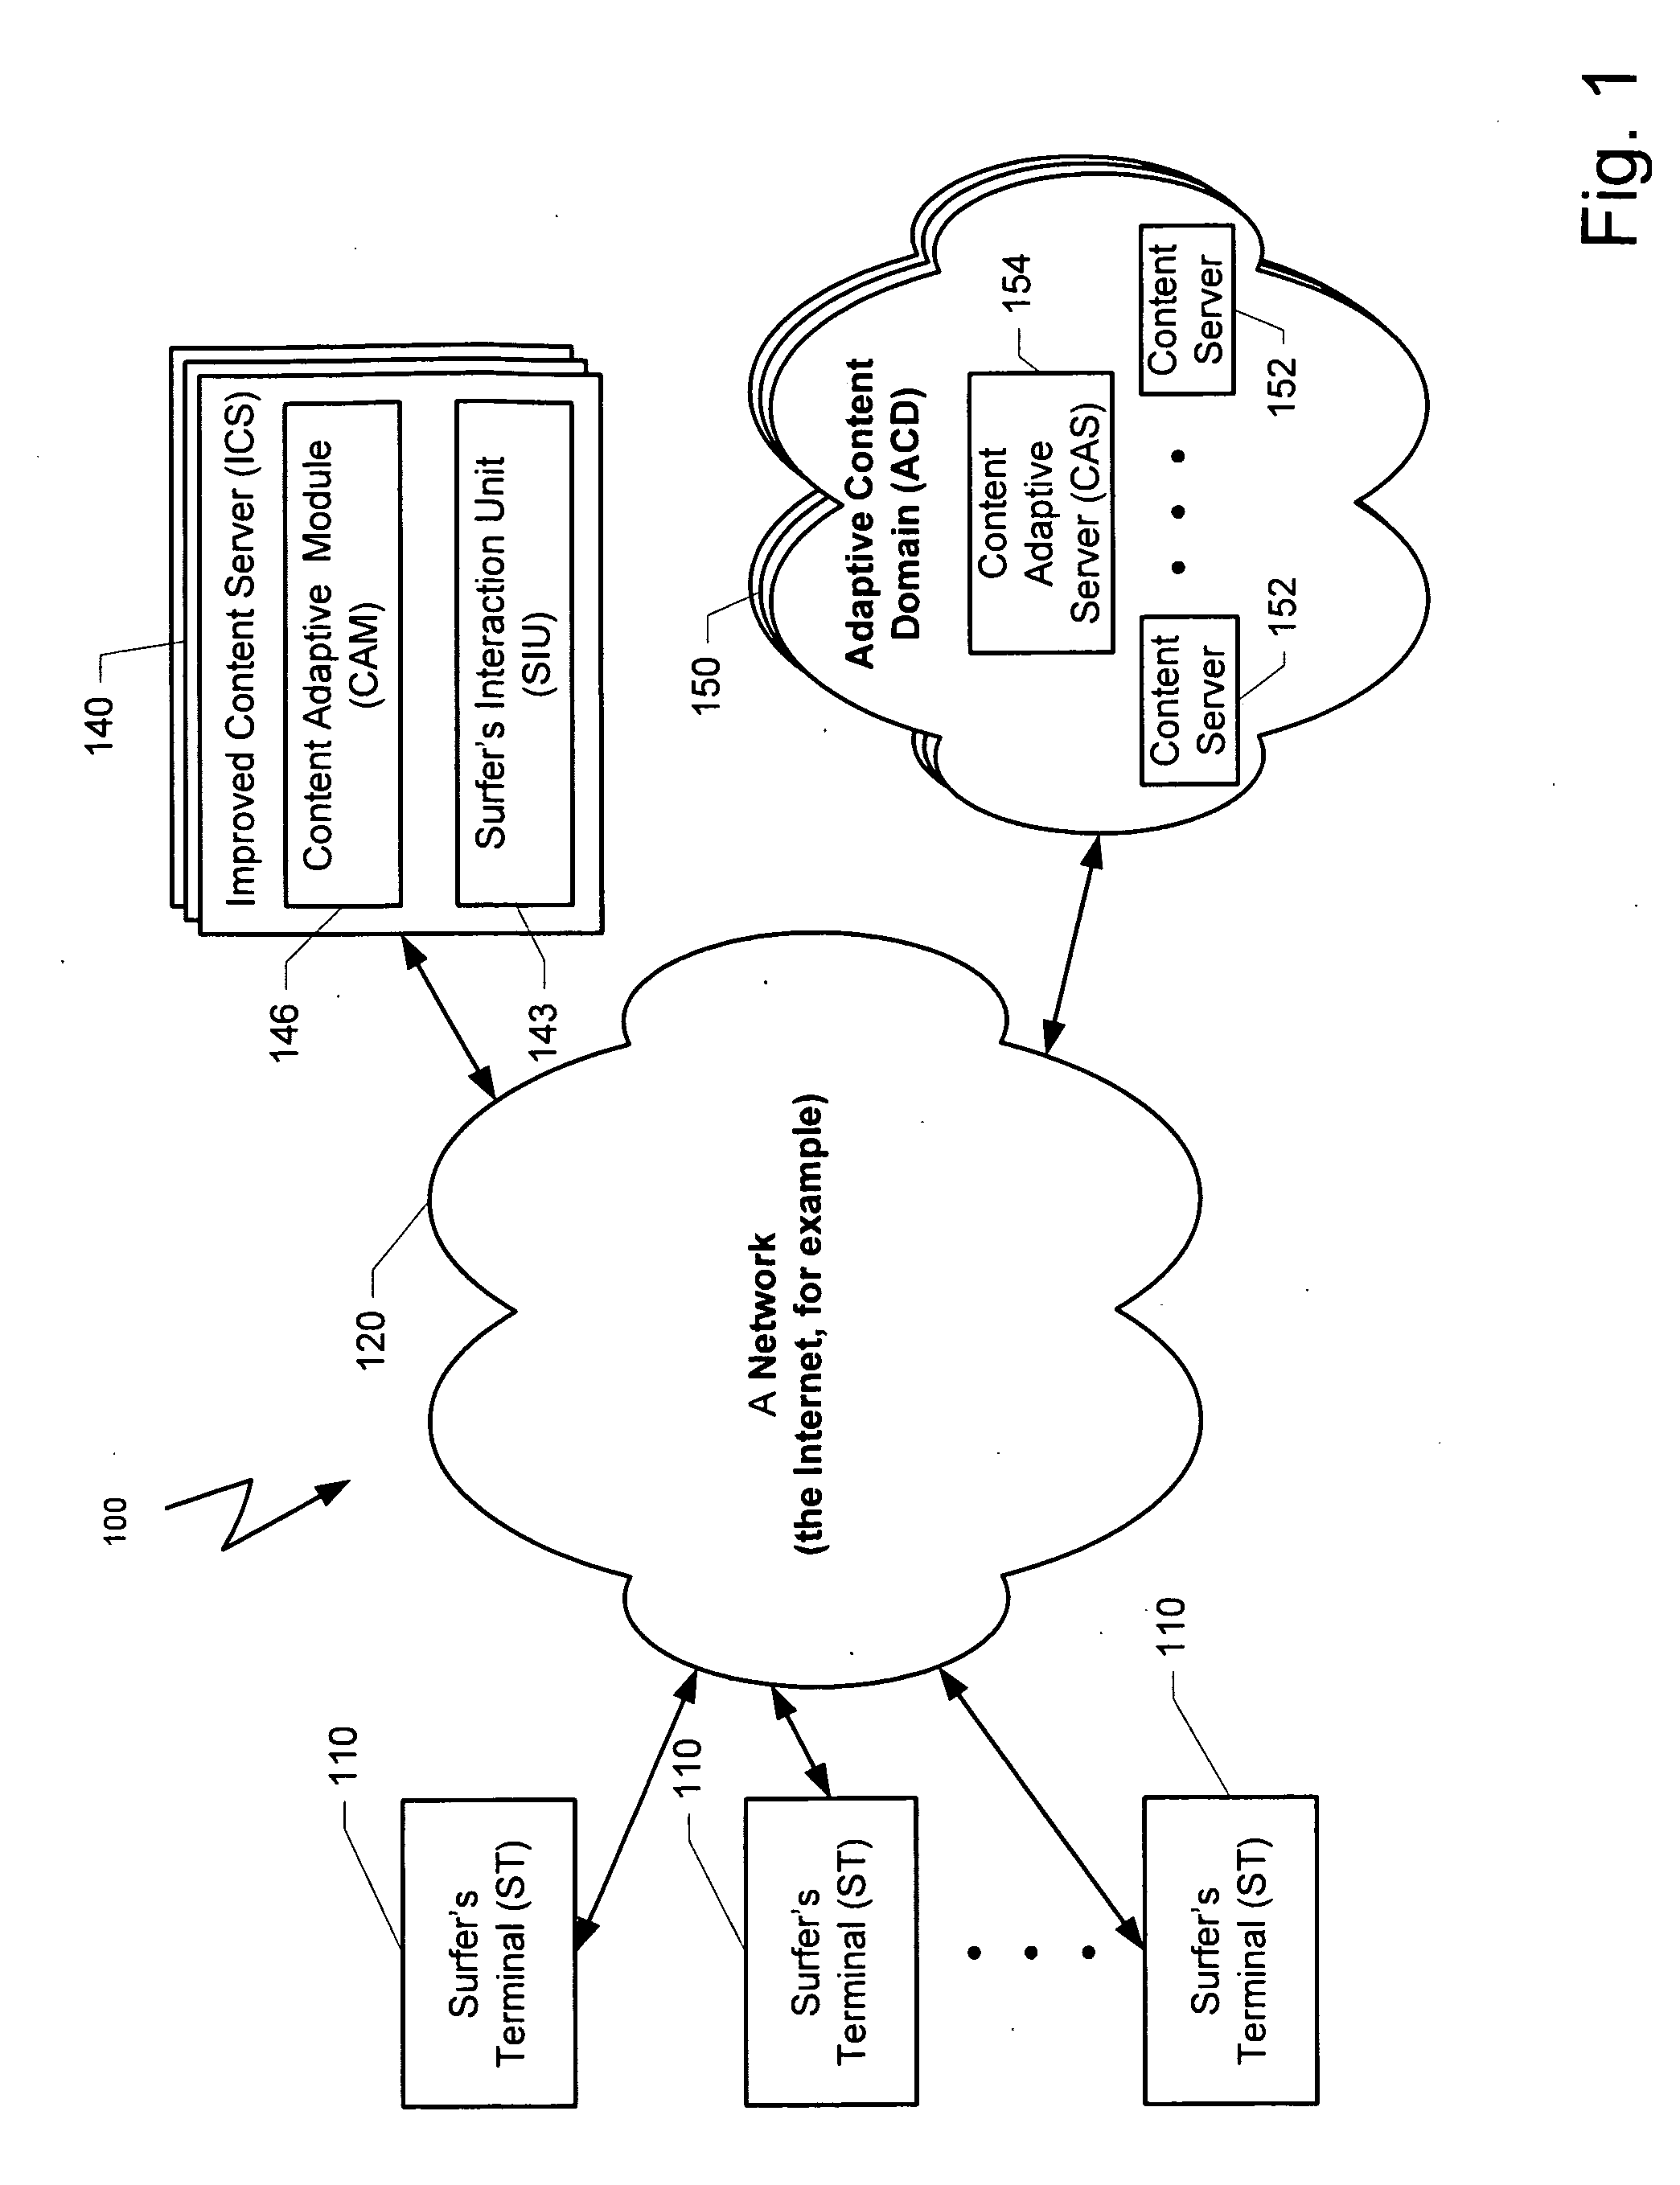 Method and system for creating a predictive model for targeting webpage to a surfer